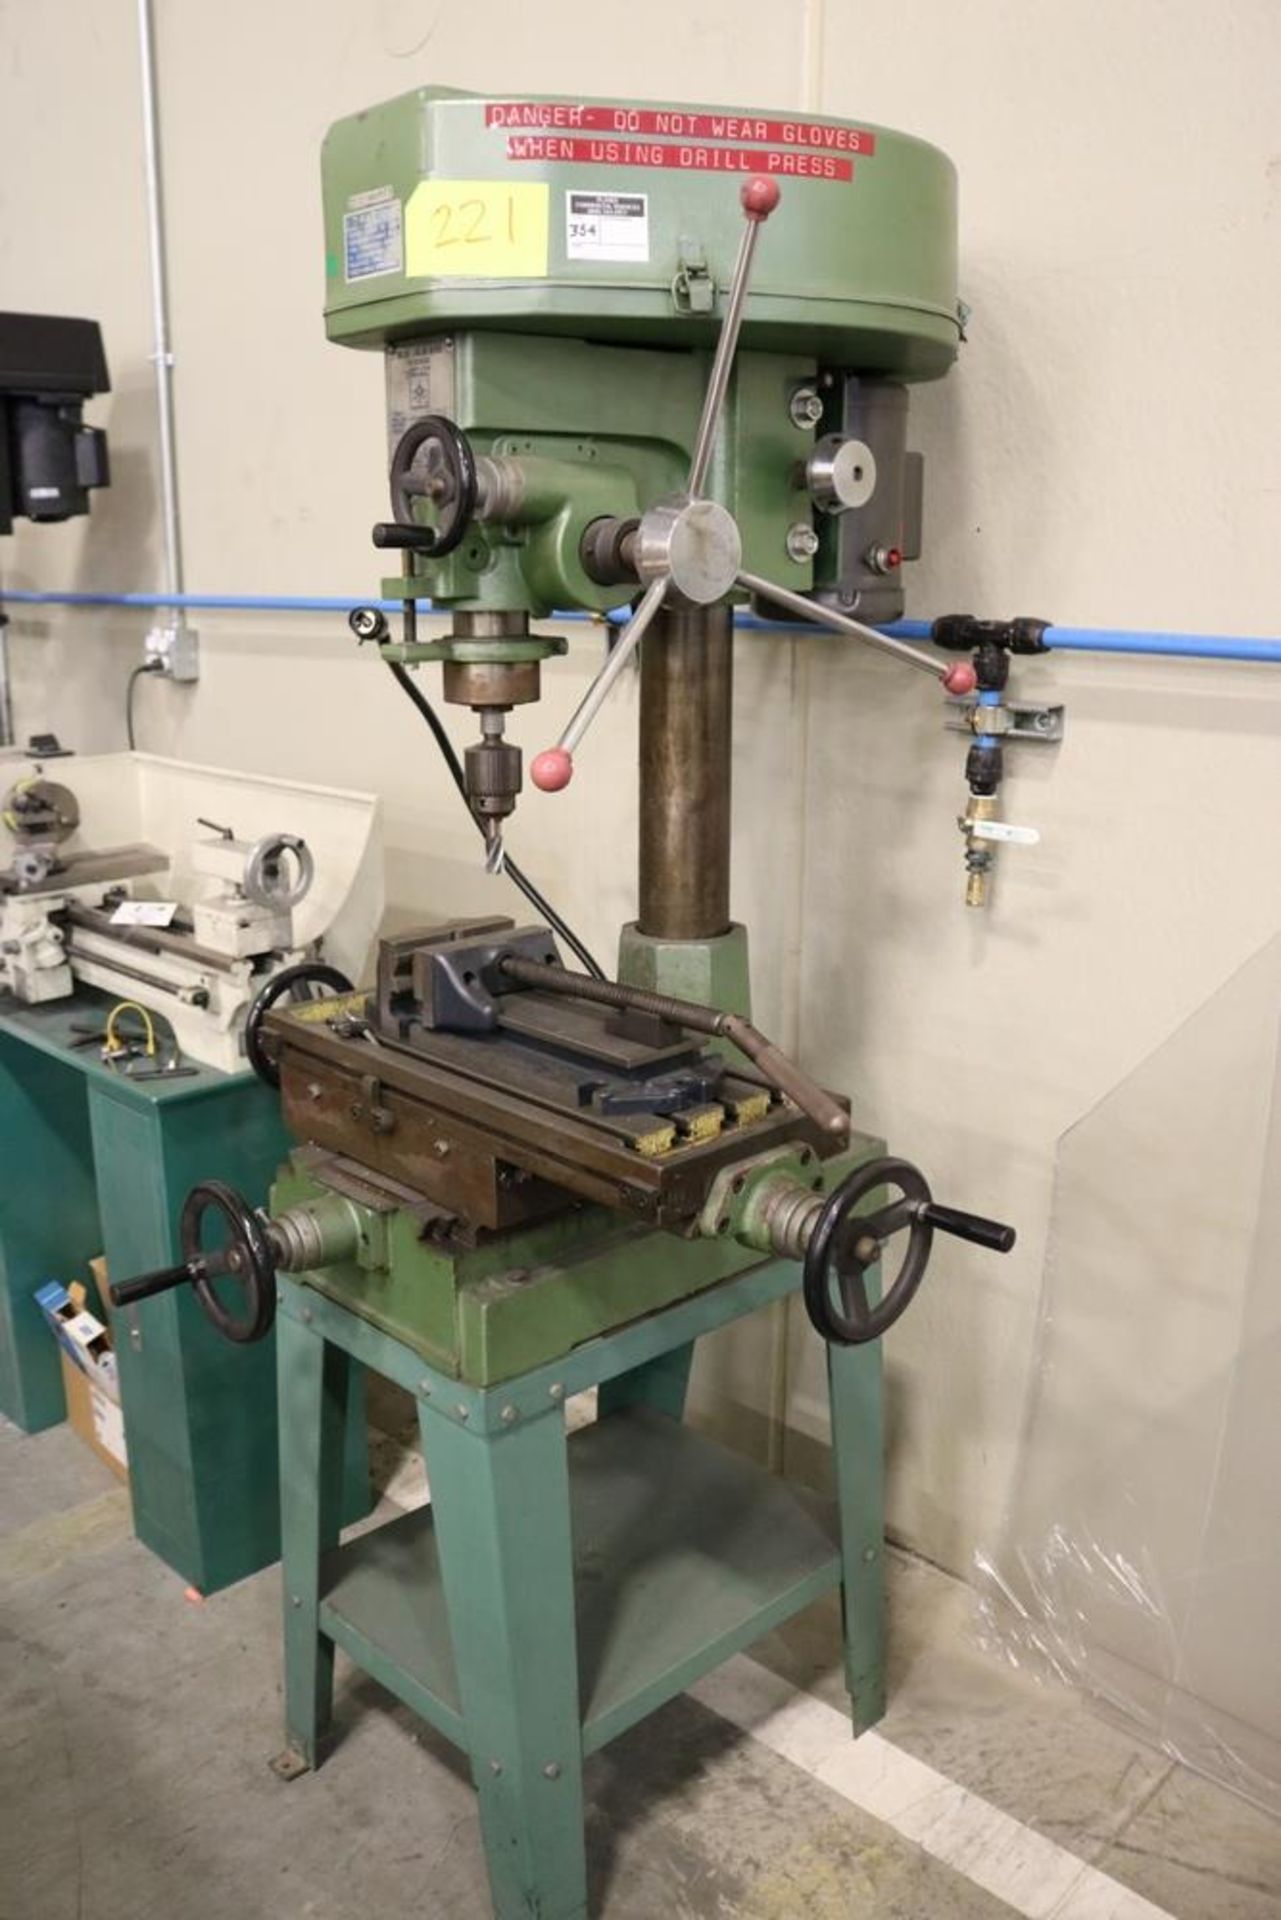 Jet 12 Speed Drilling & Milling Machine Jet-16 1HP 1 Phase Jacob Chuck 6" Speed Vise on Stand - Image 2 of 8